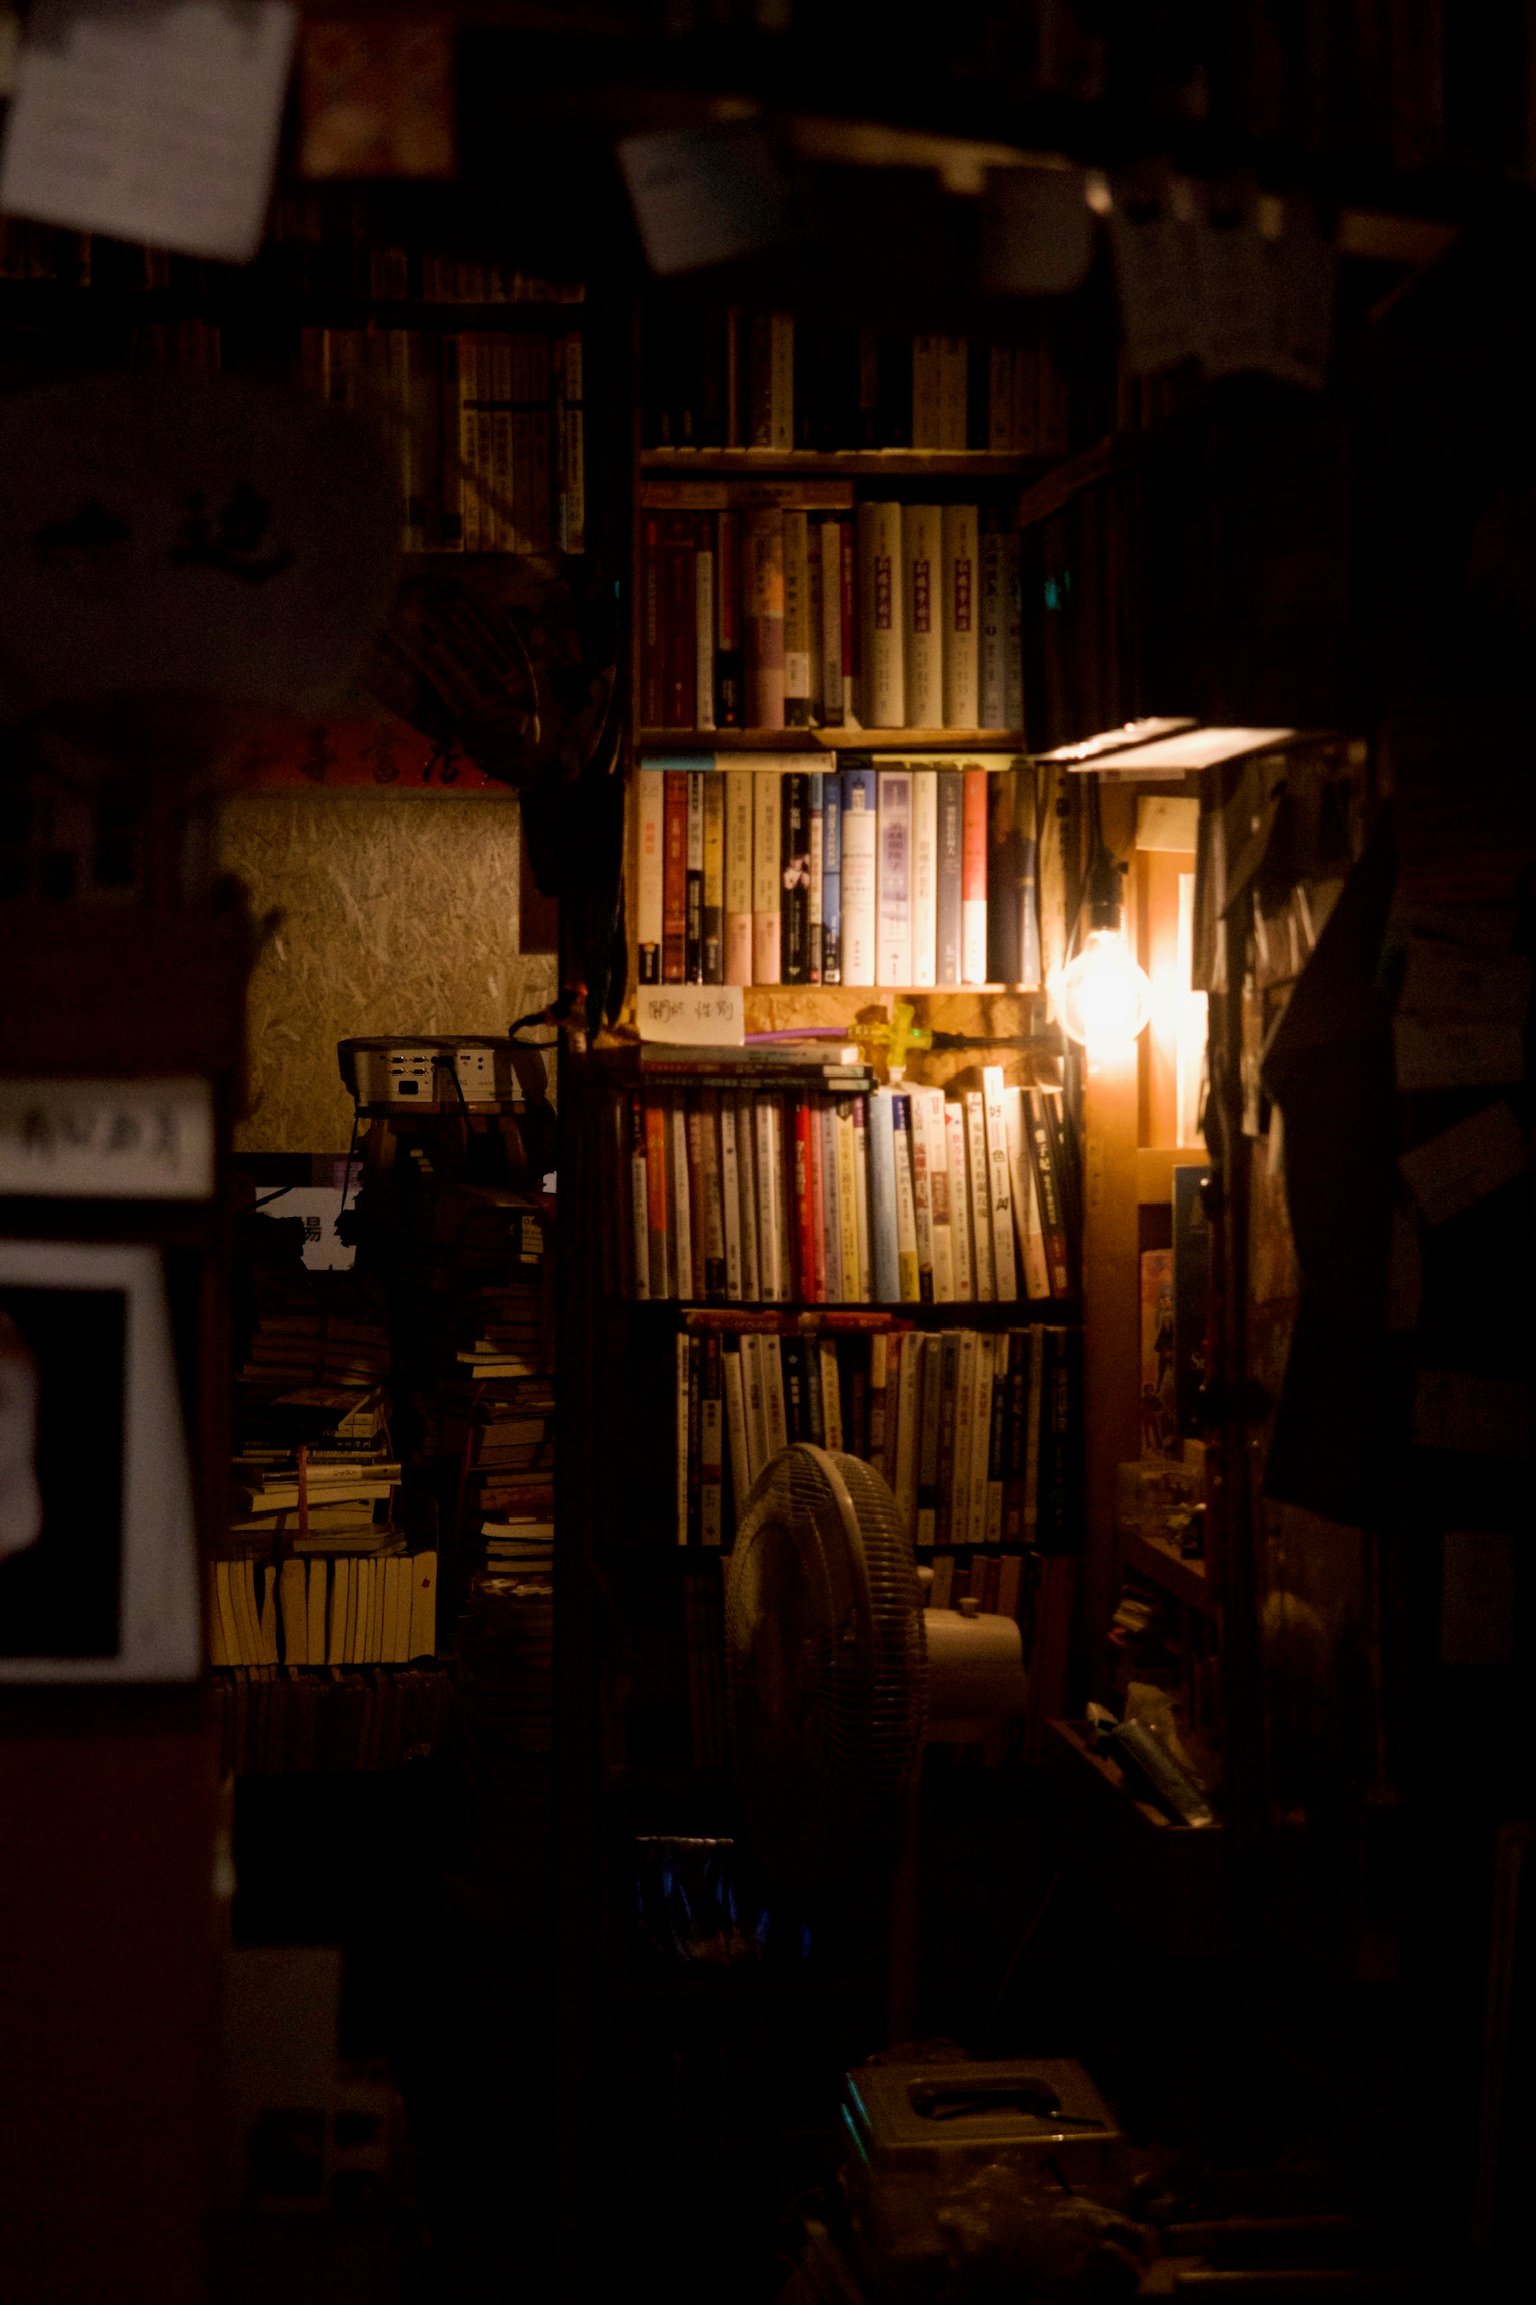 A dimly lit bookstore with makeshift shelves.